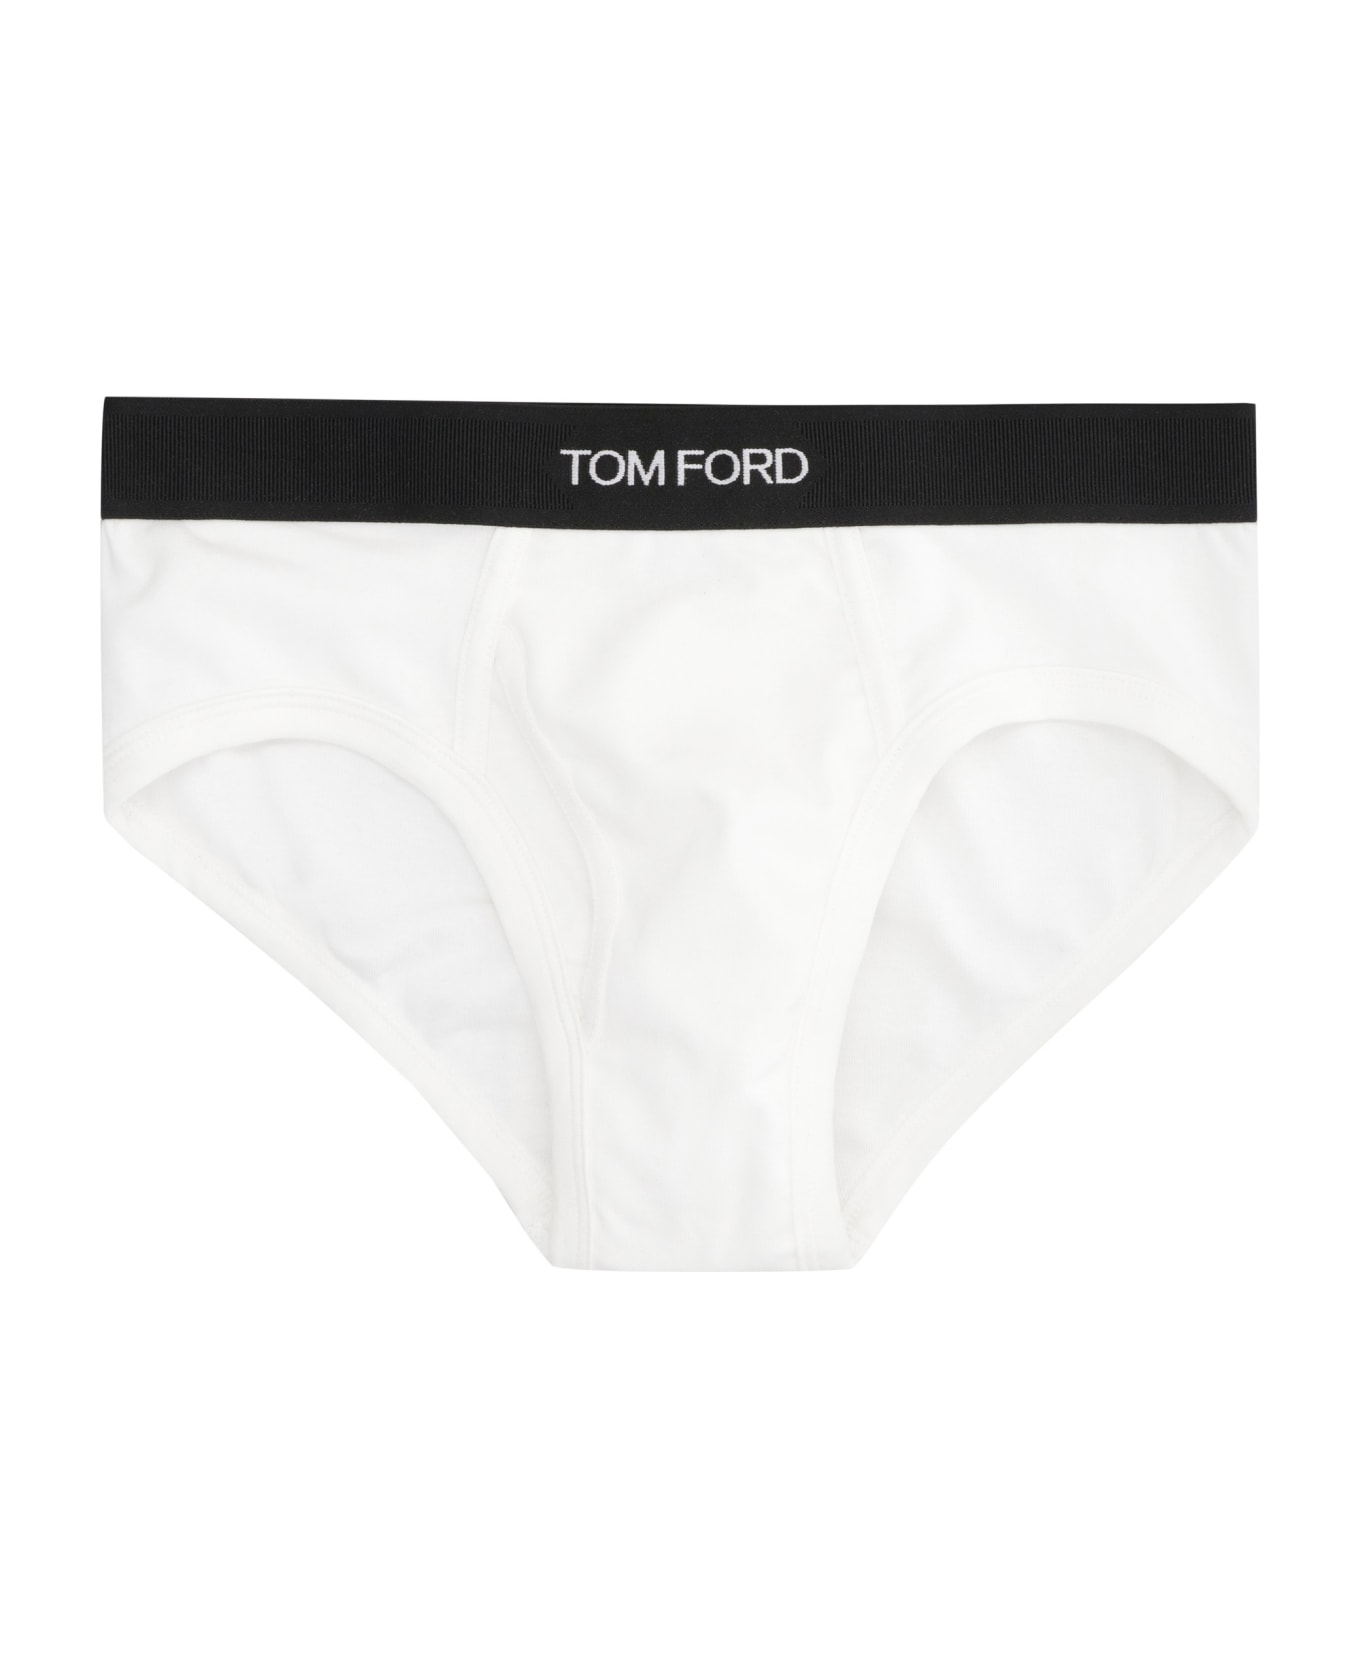 Tom Ford Cotton Briefs With Elastic Band - WHITE ショーツ